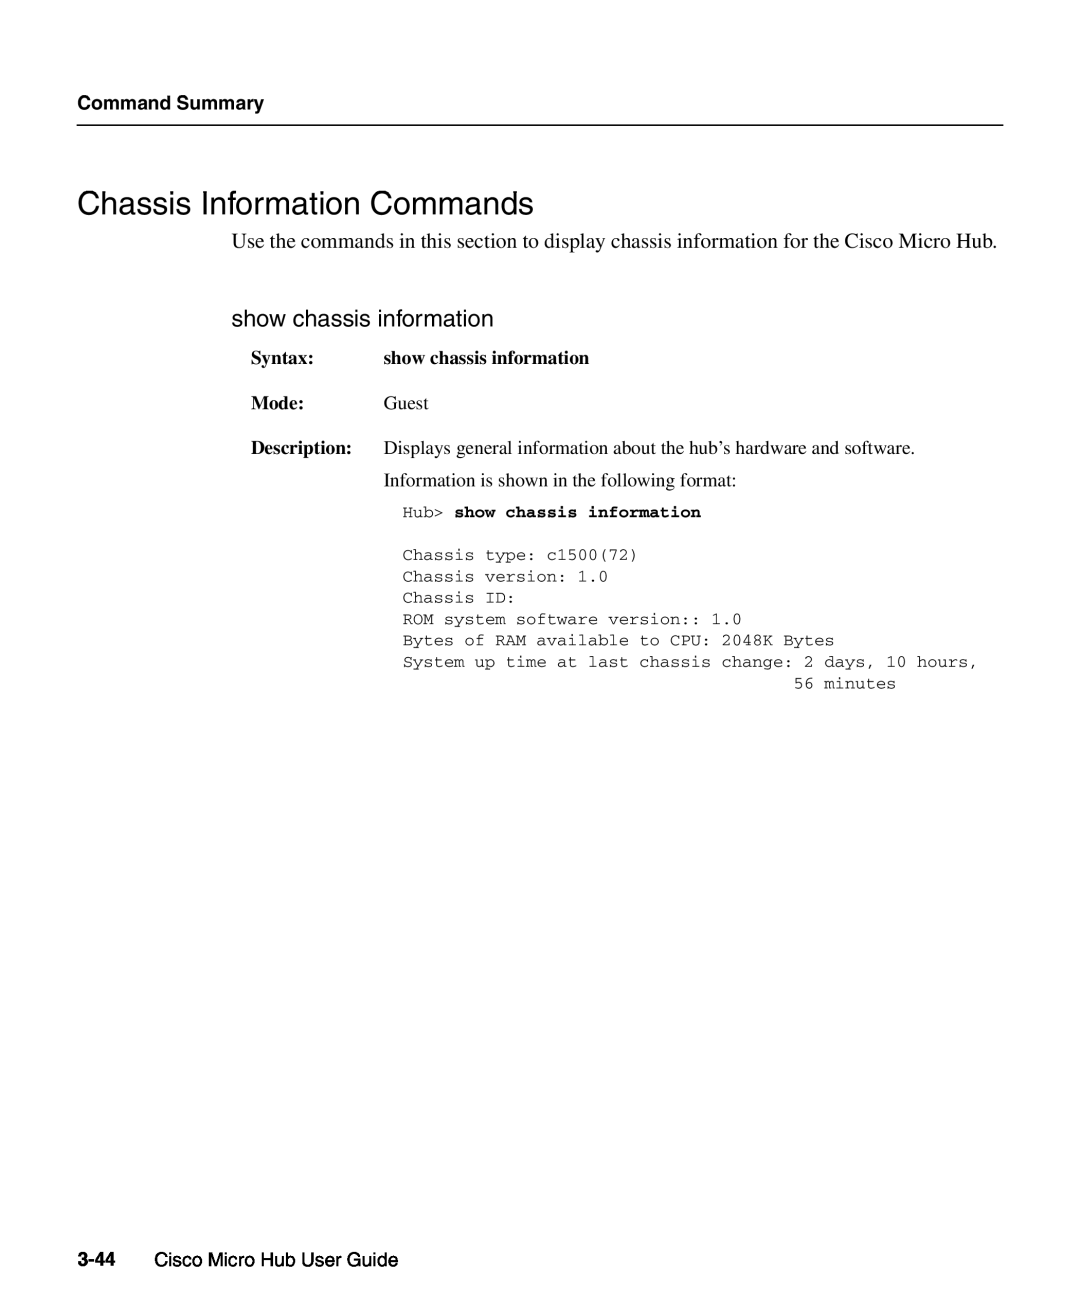 Cisco Systems 1503 Chassis Information Commands, show chassis information, Command Summary, Cisco Micro Hub User Guide 